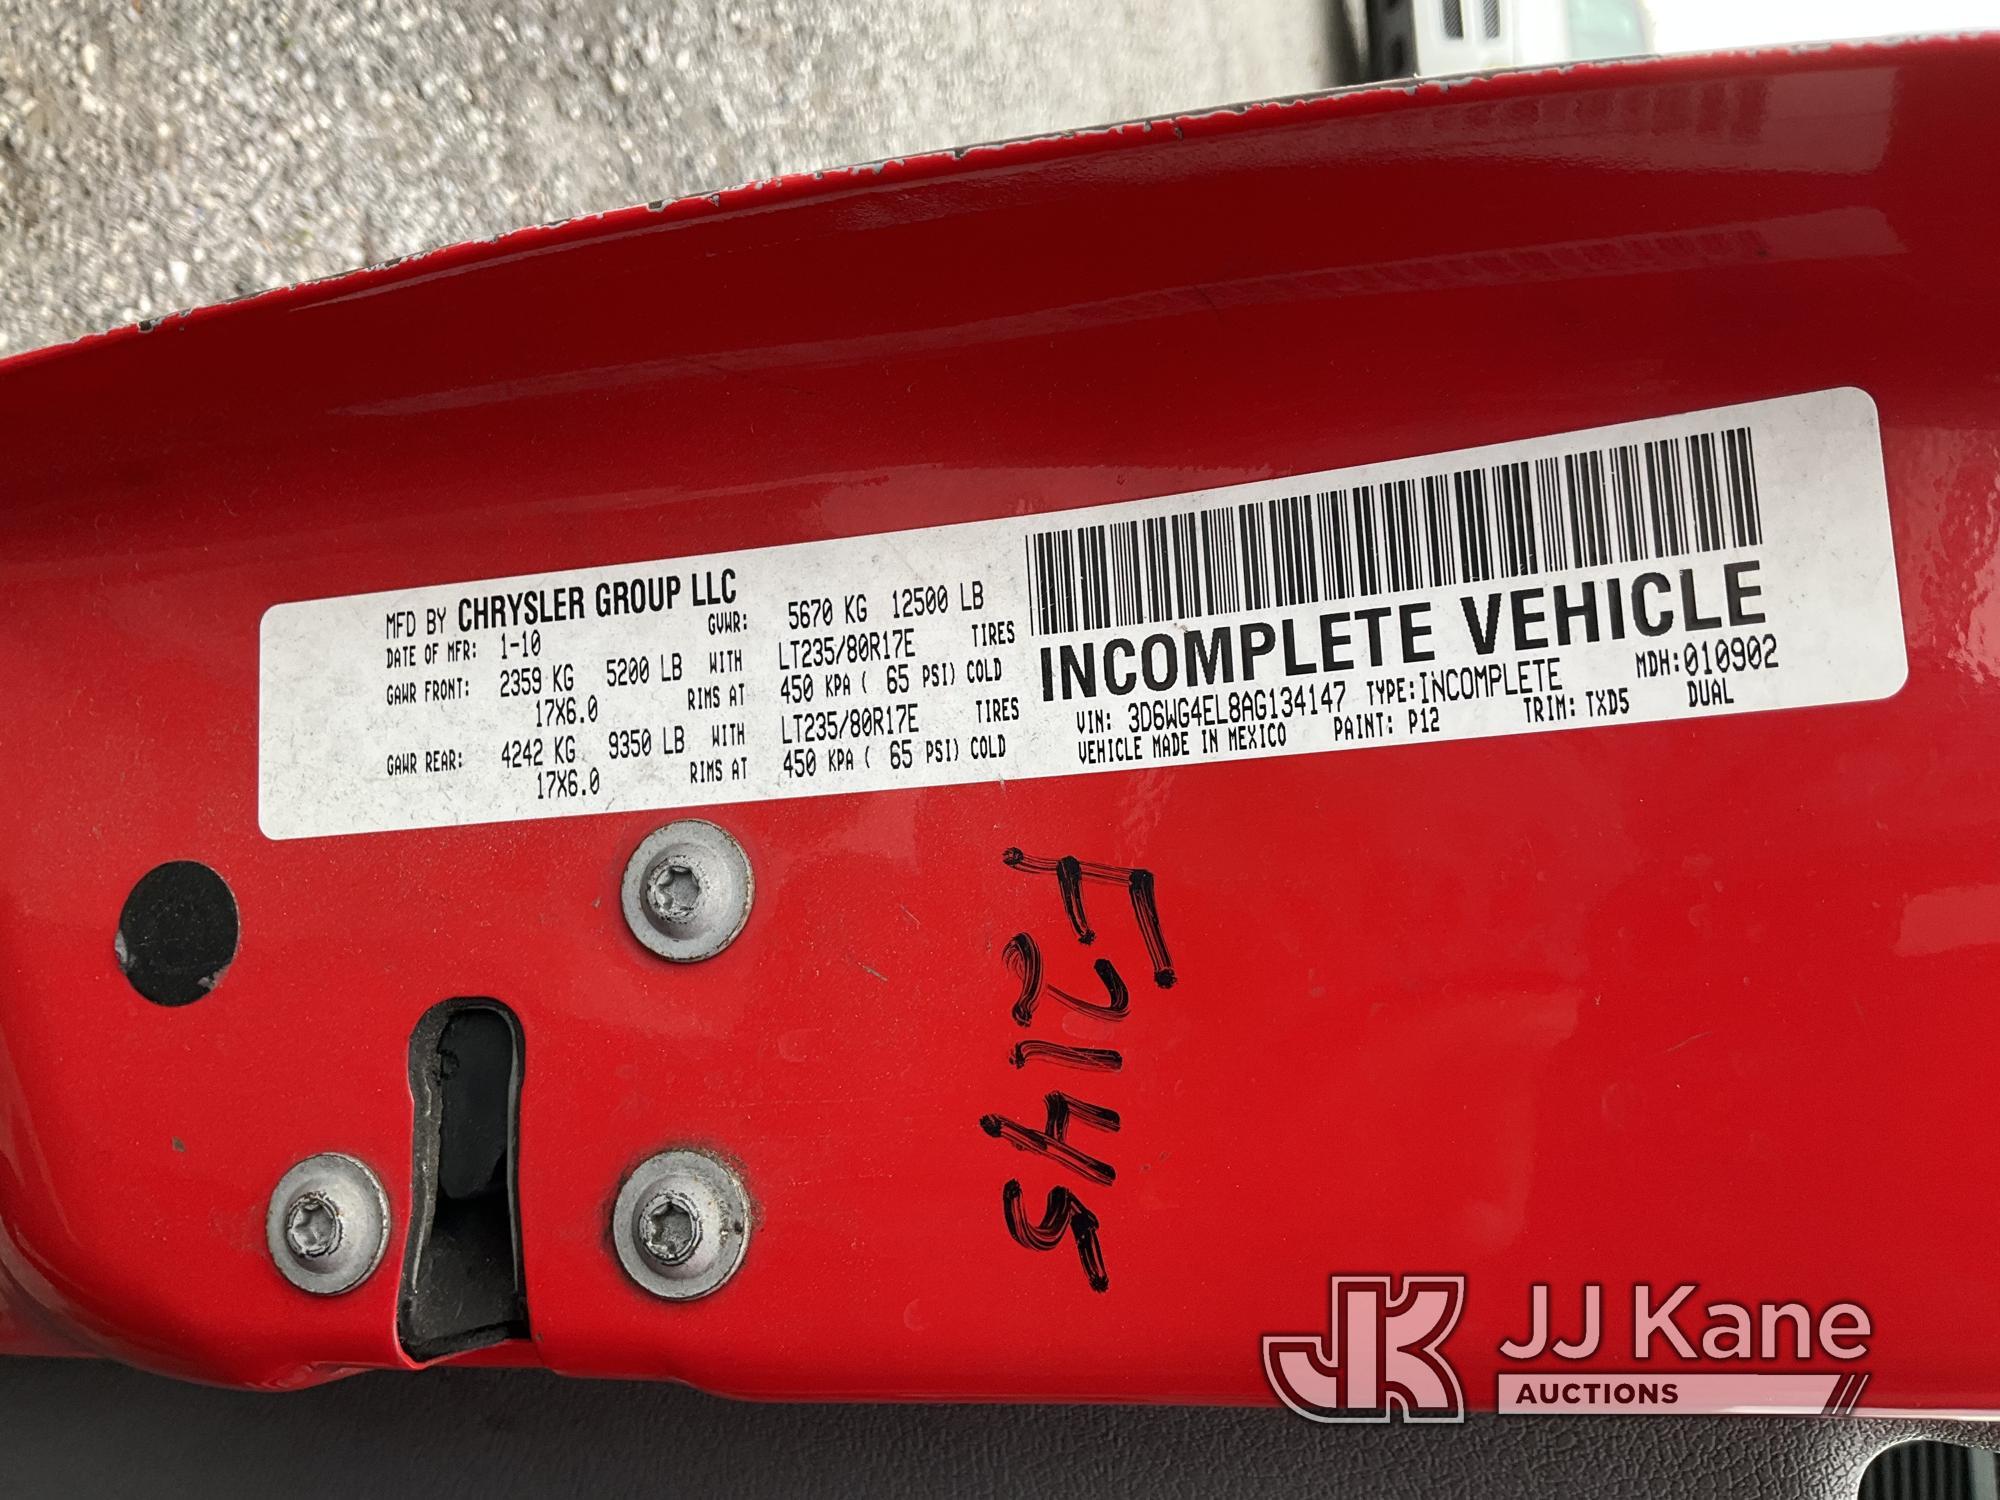 (Jurupa Valley, CA) 2010 Dodge RAM 3500 Service Truck Not Running, Front End Wrecked, Check Engine L